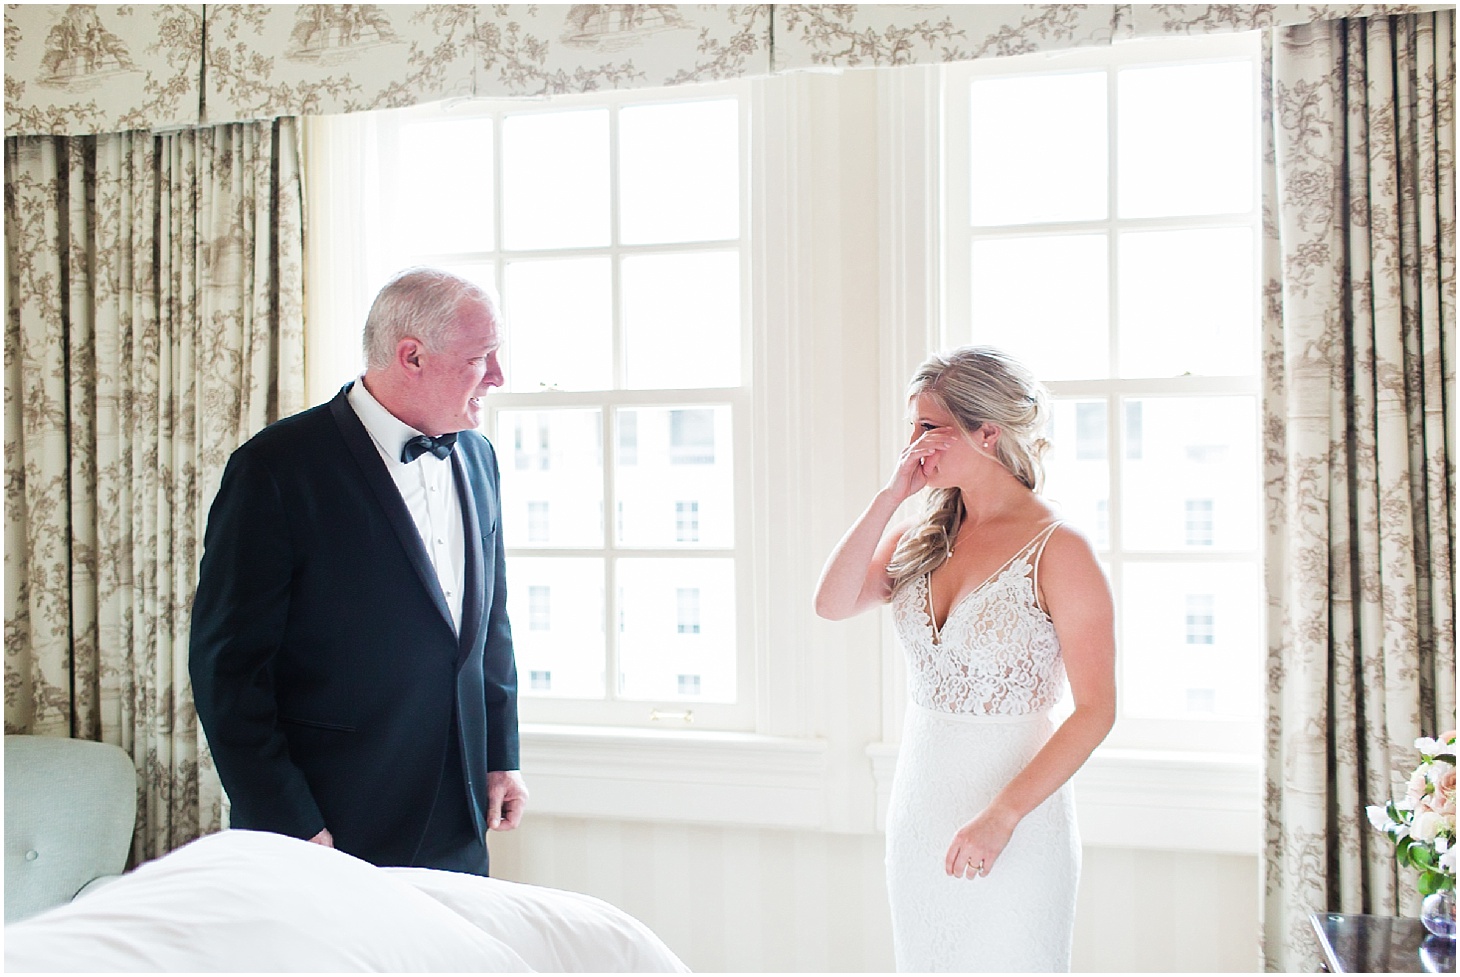 Bride Getting Ready at Hay-Adams Hotel in Washington,DC | French-Inspired New Years Eve Wedding at the Decatur House | Sarah Bradshaw Photography | Washington DC Wedding Photographer